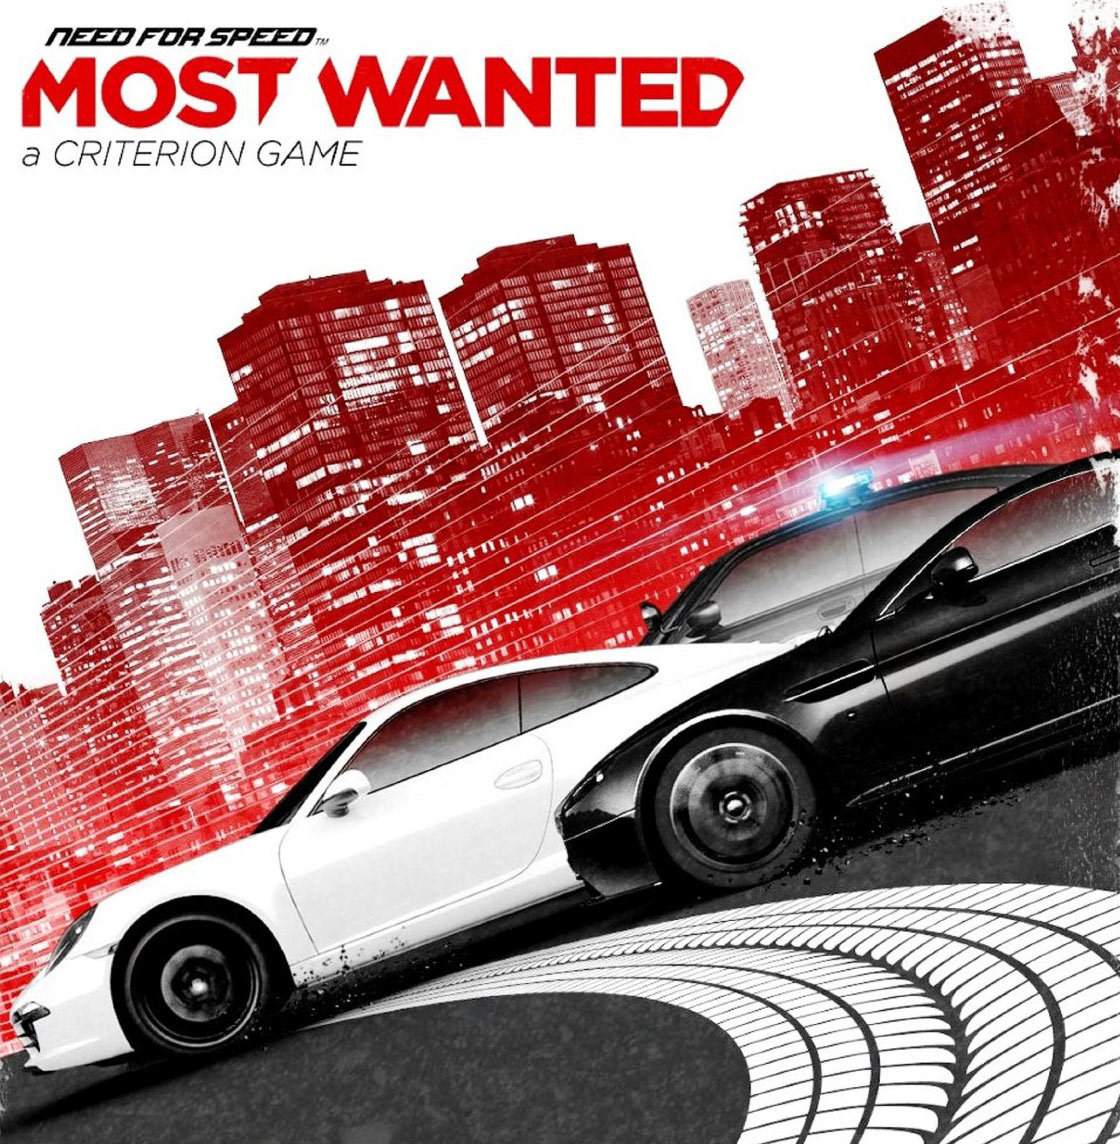 Nfs most wanted стим фото 41